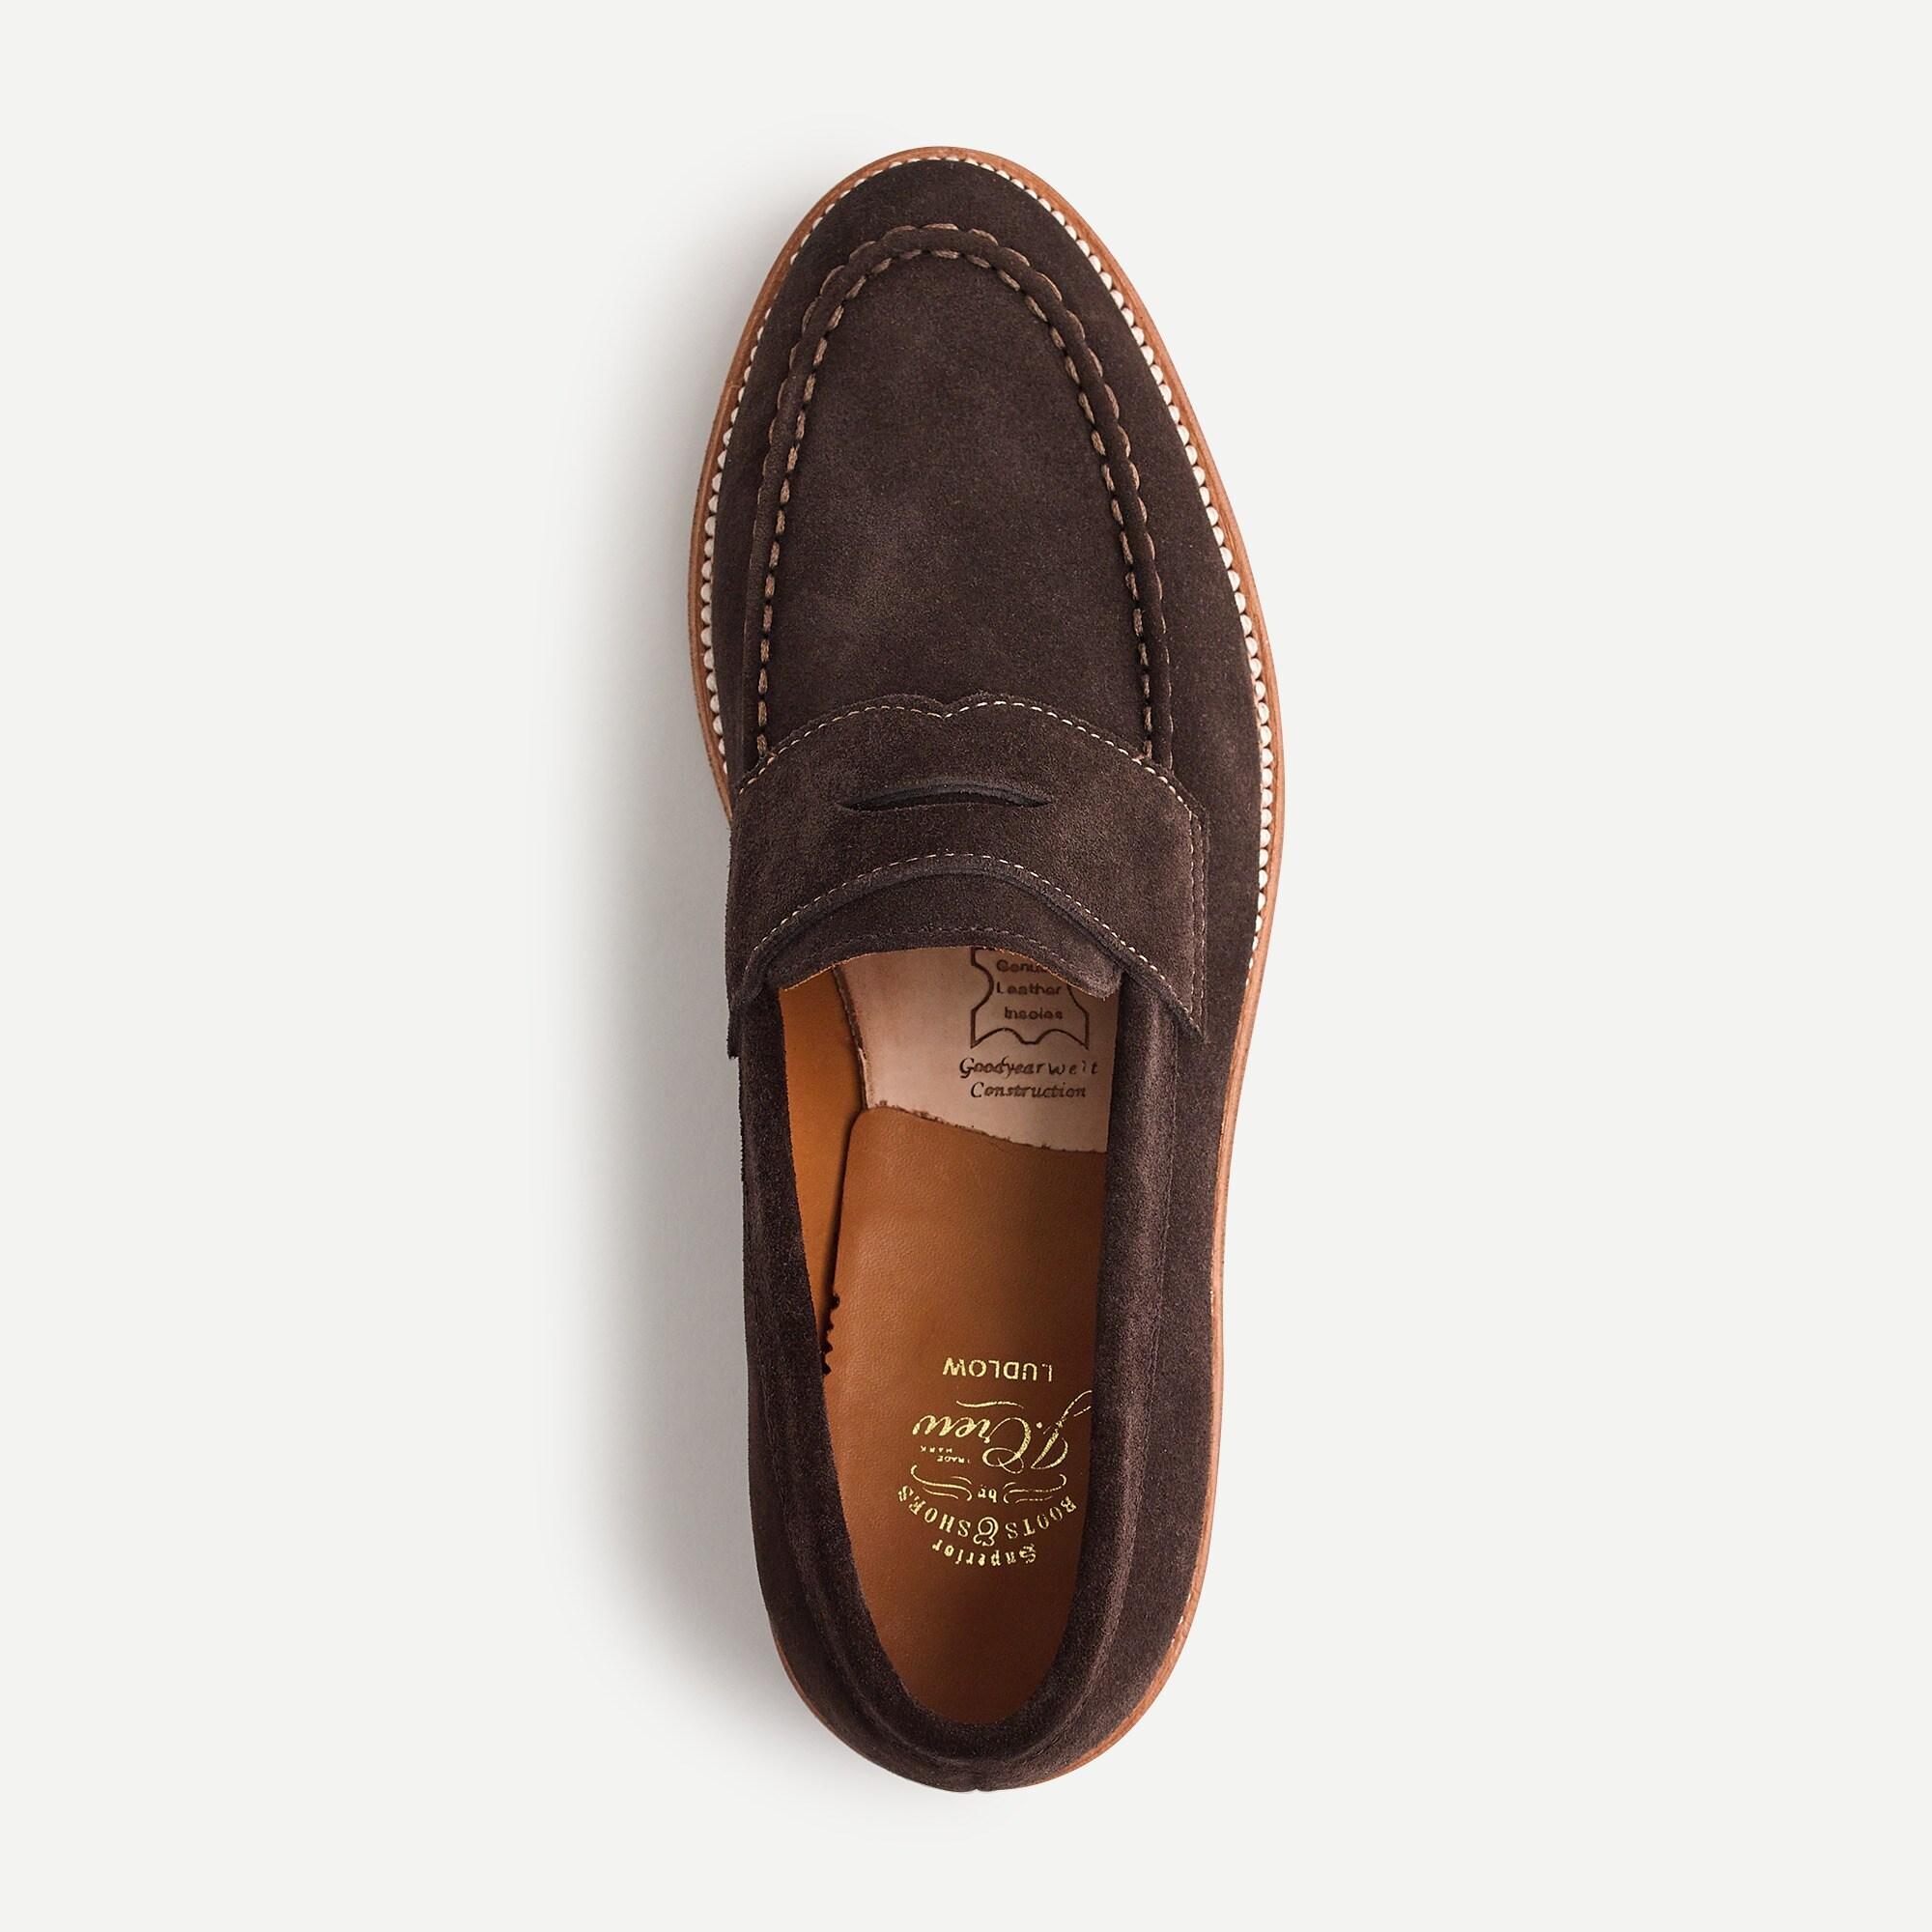 j crew ludlow penny loafer